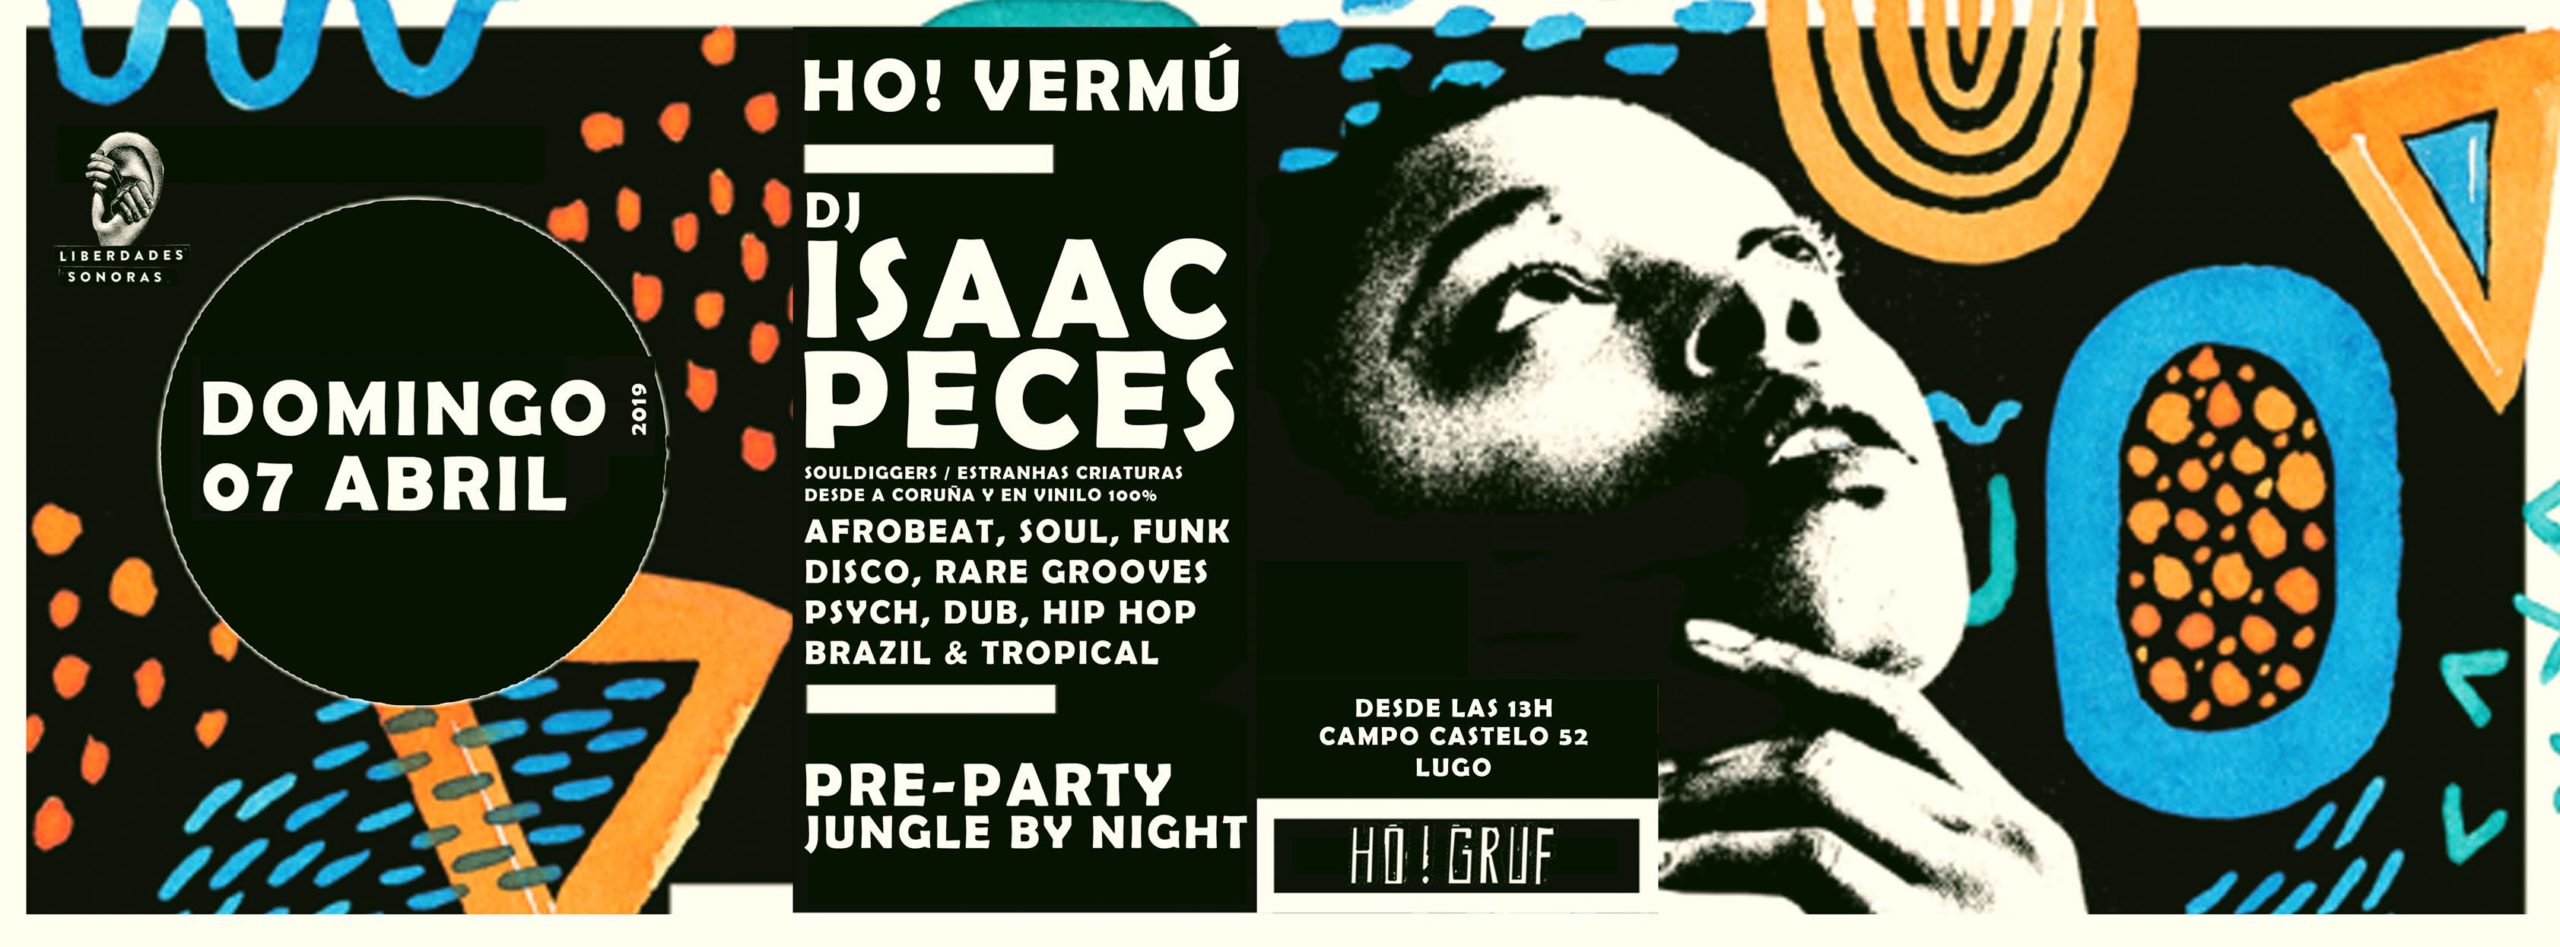 Isaac Peces & Ho! Vermú "Pre-party oficial" Jungle By Night